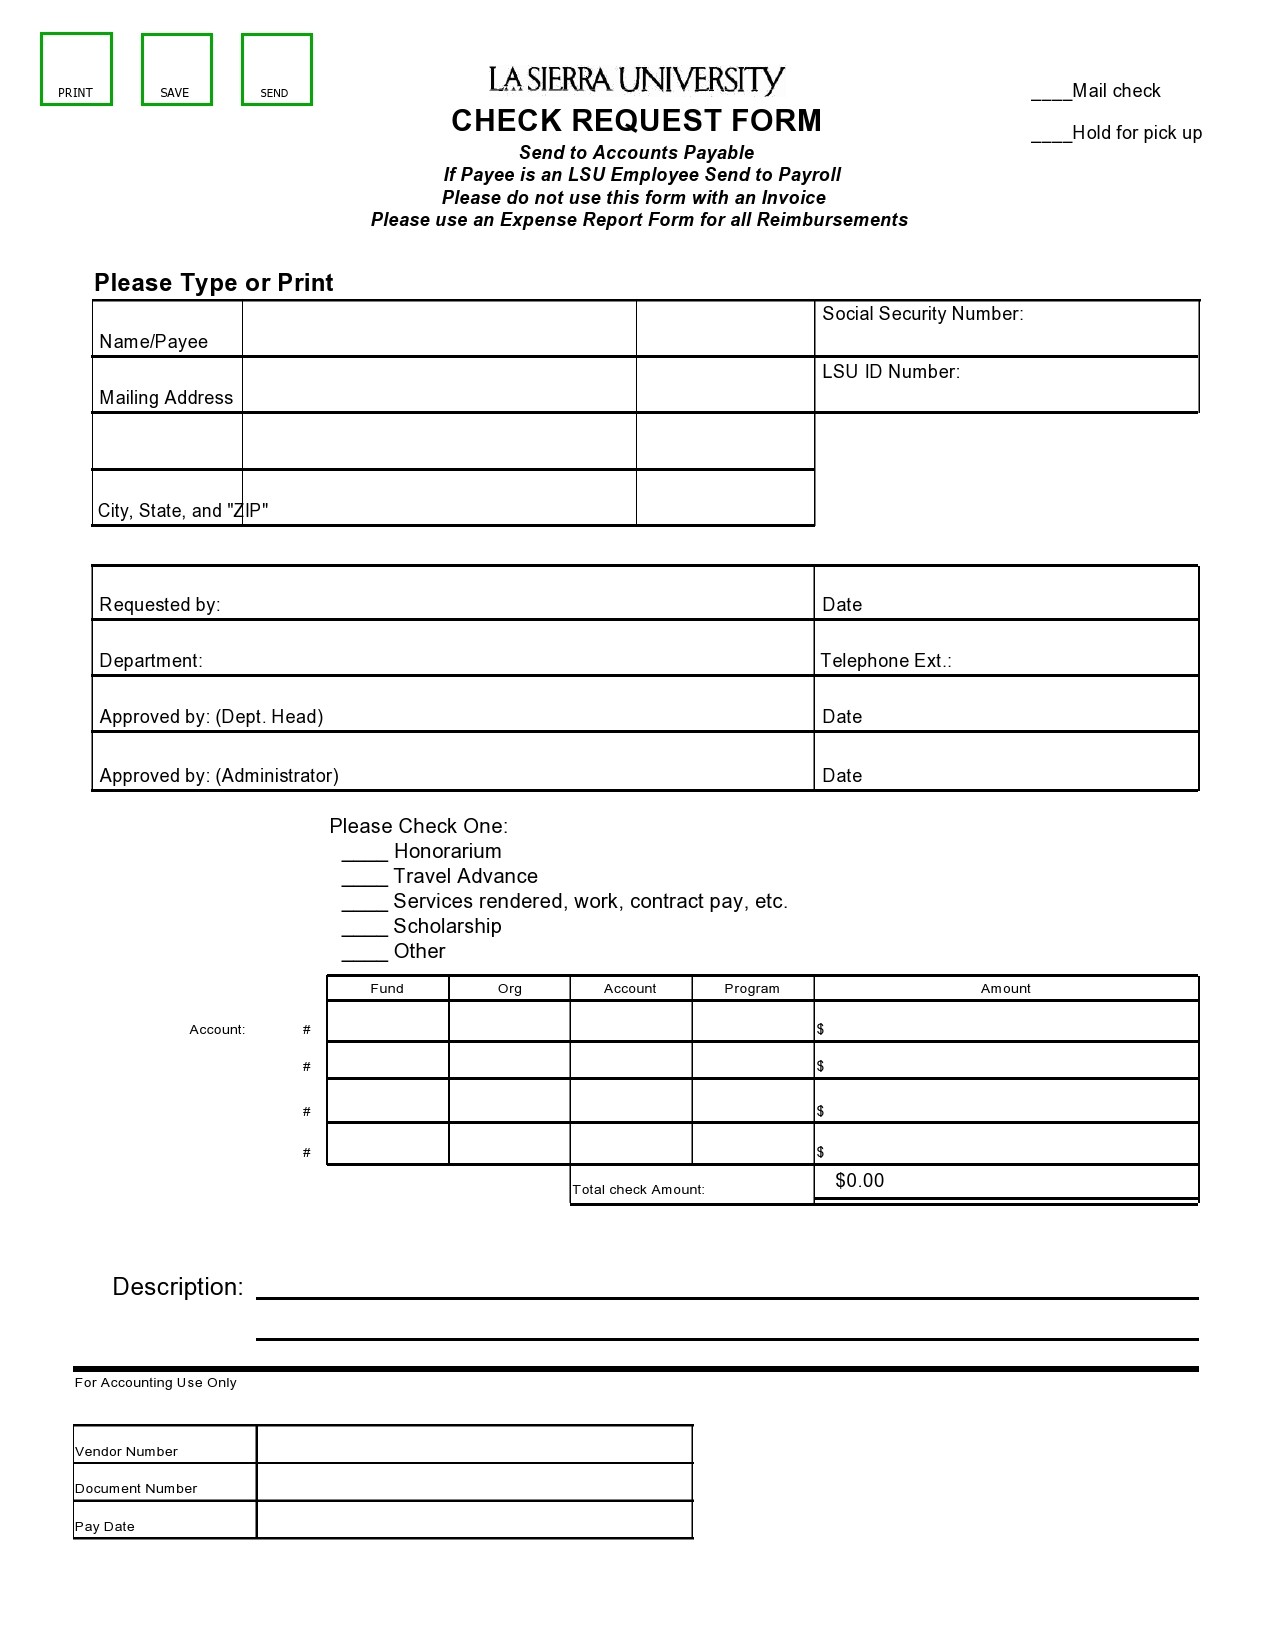 Payment Request Form Template from templatelab.com